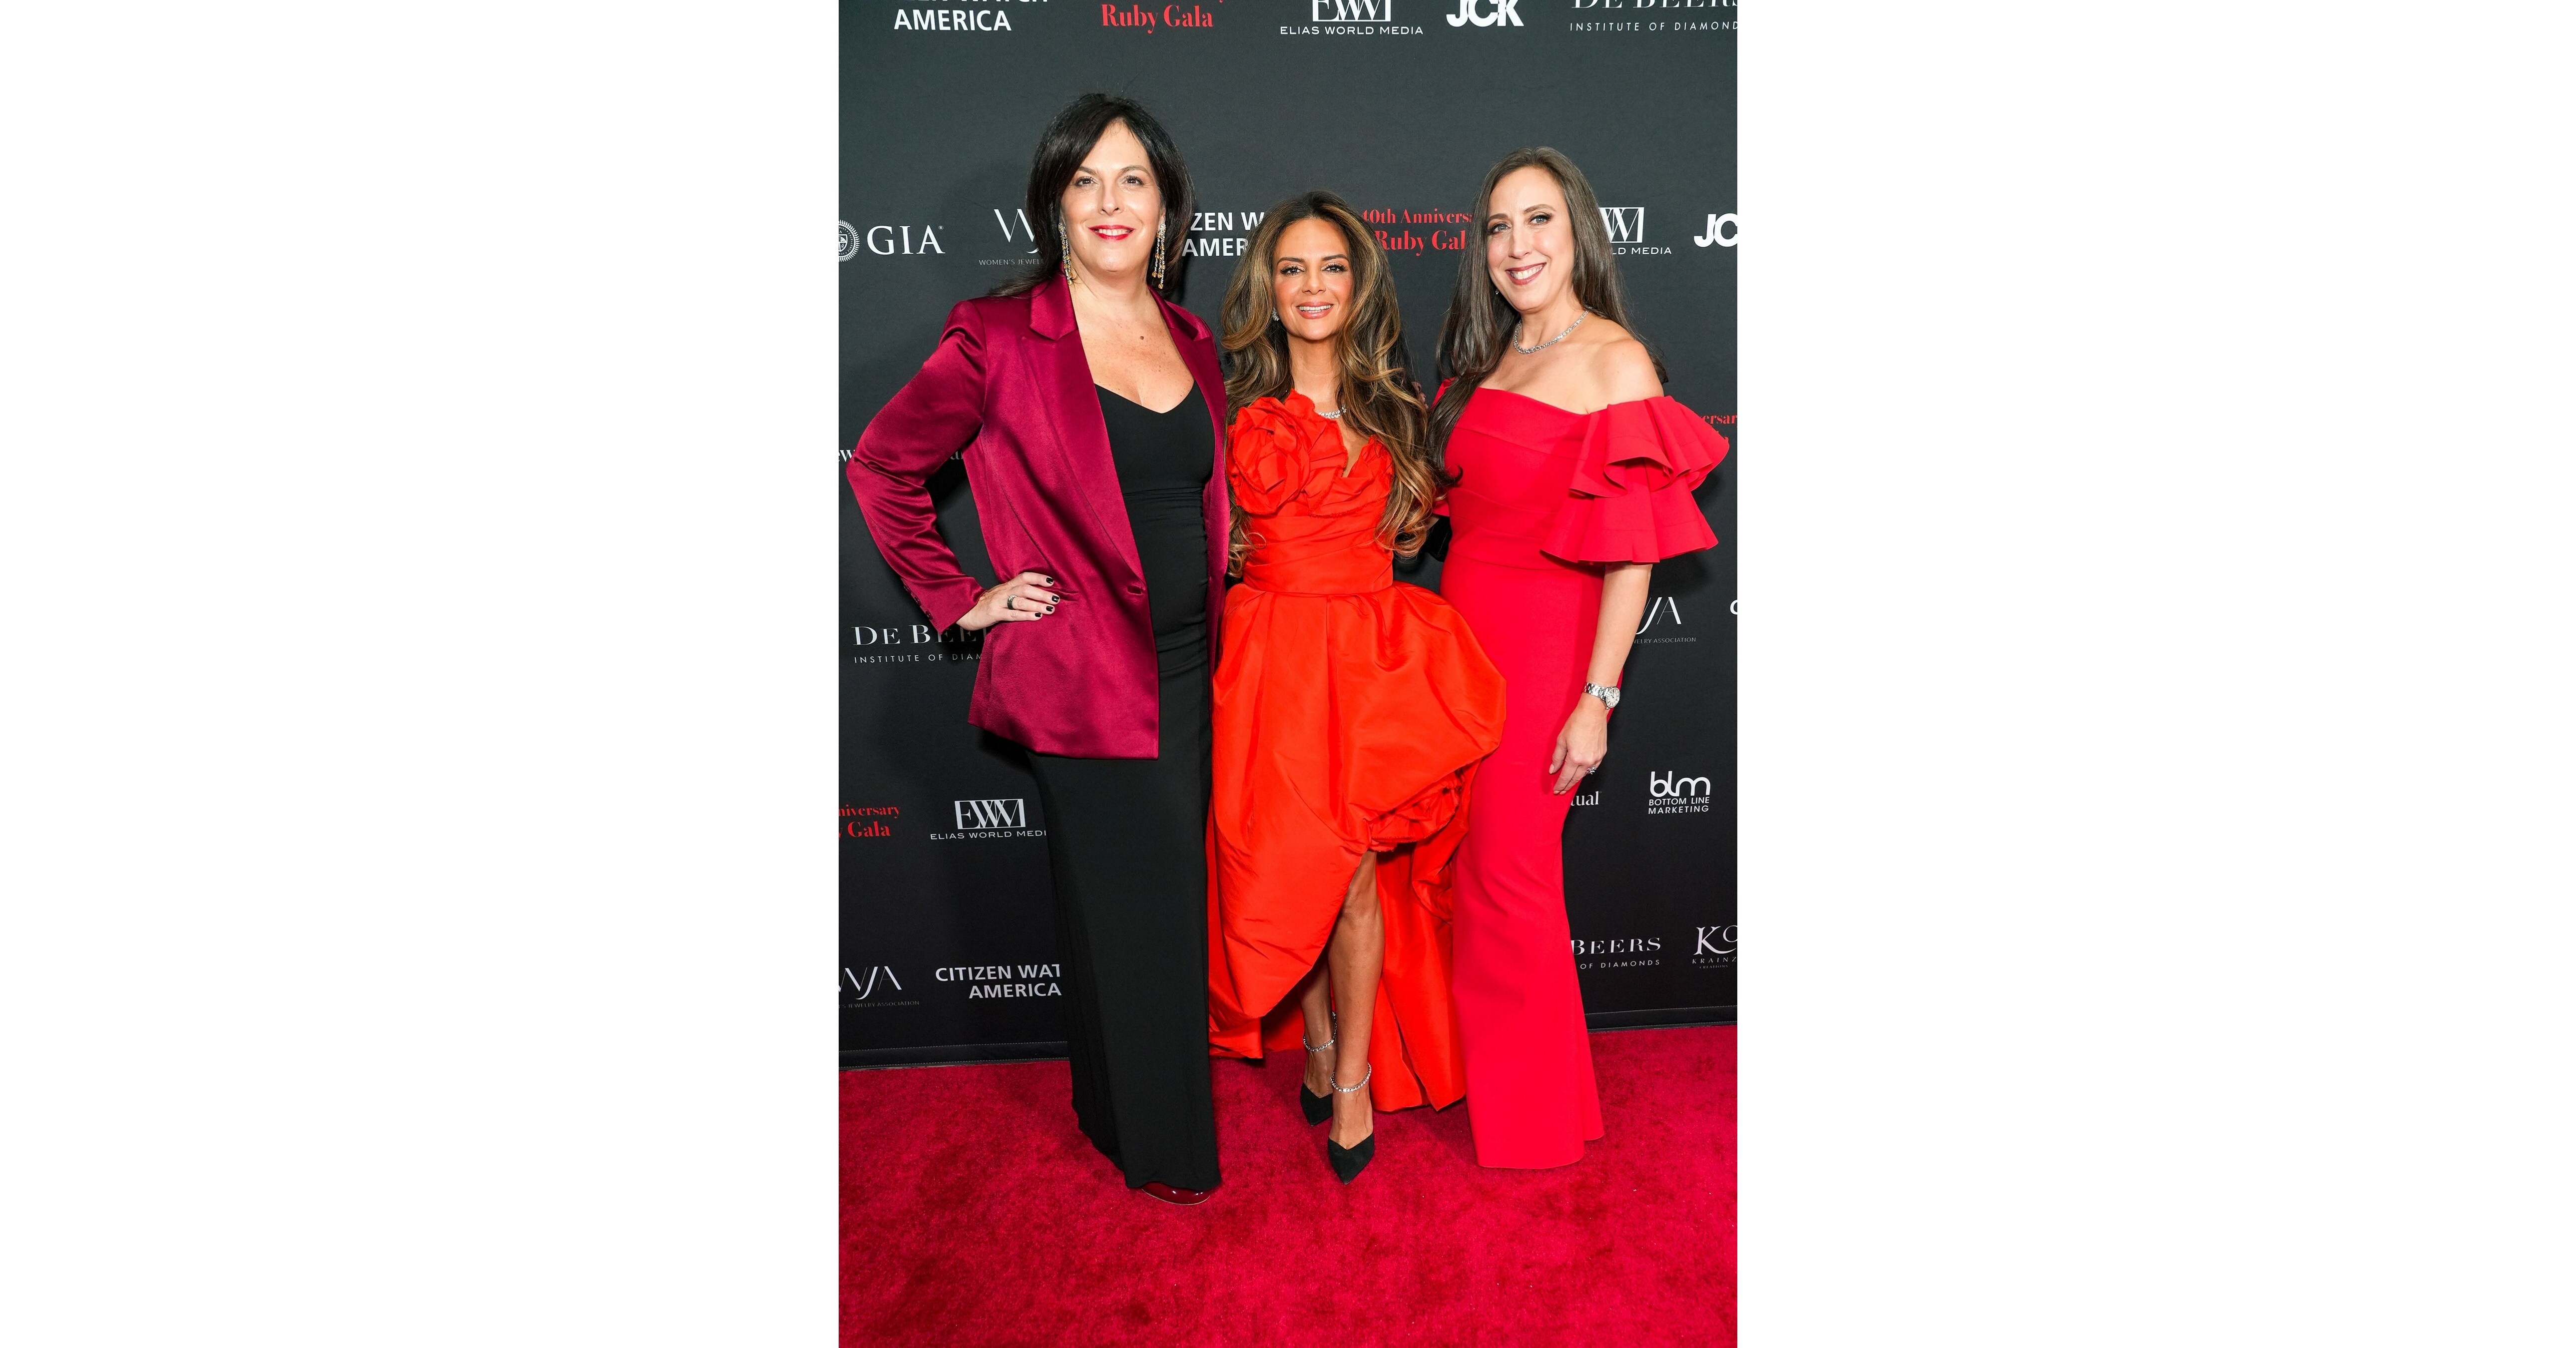 WJA Ruby Gala Shines Bright, M arking 40 Years of Empowering Women within the Jewelry and Watch Industries